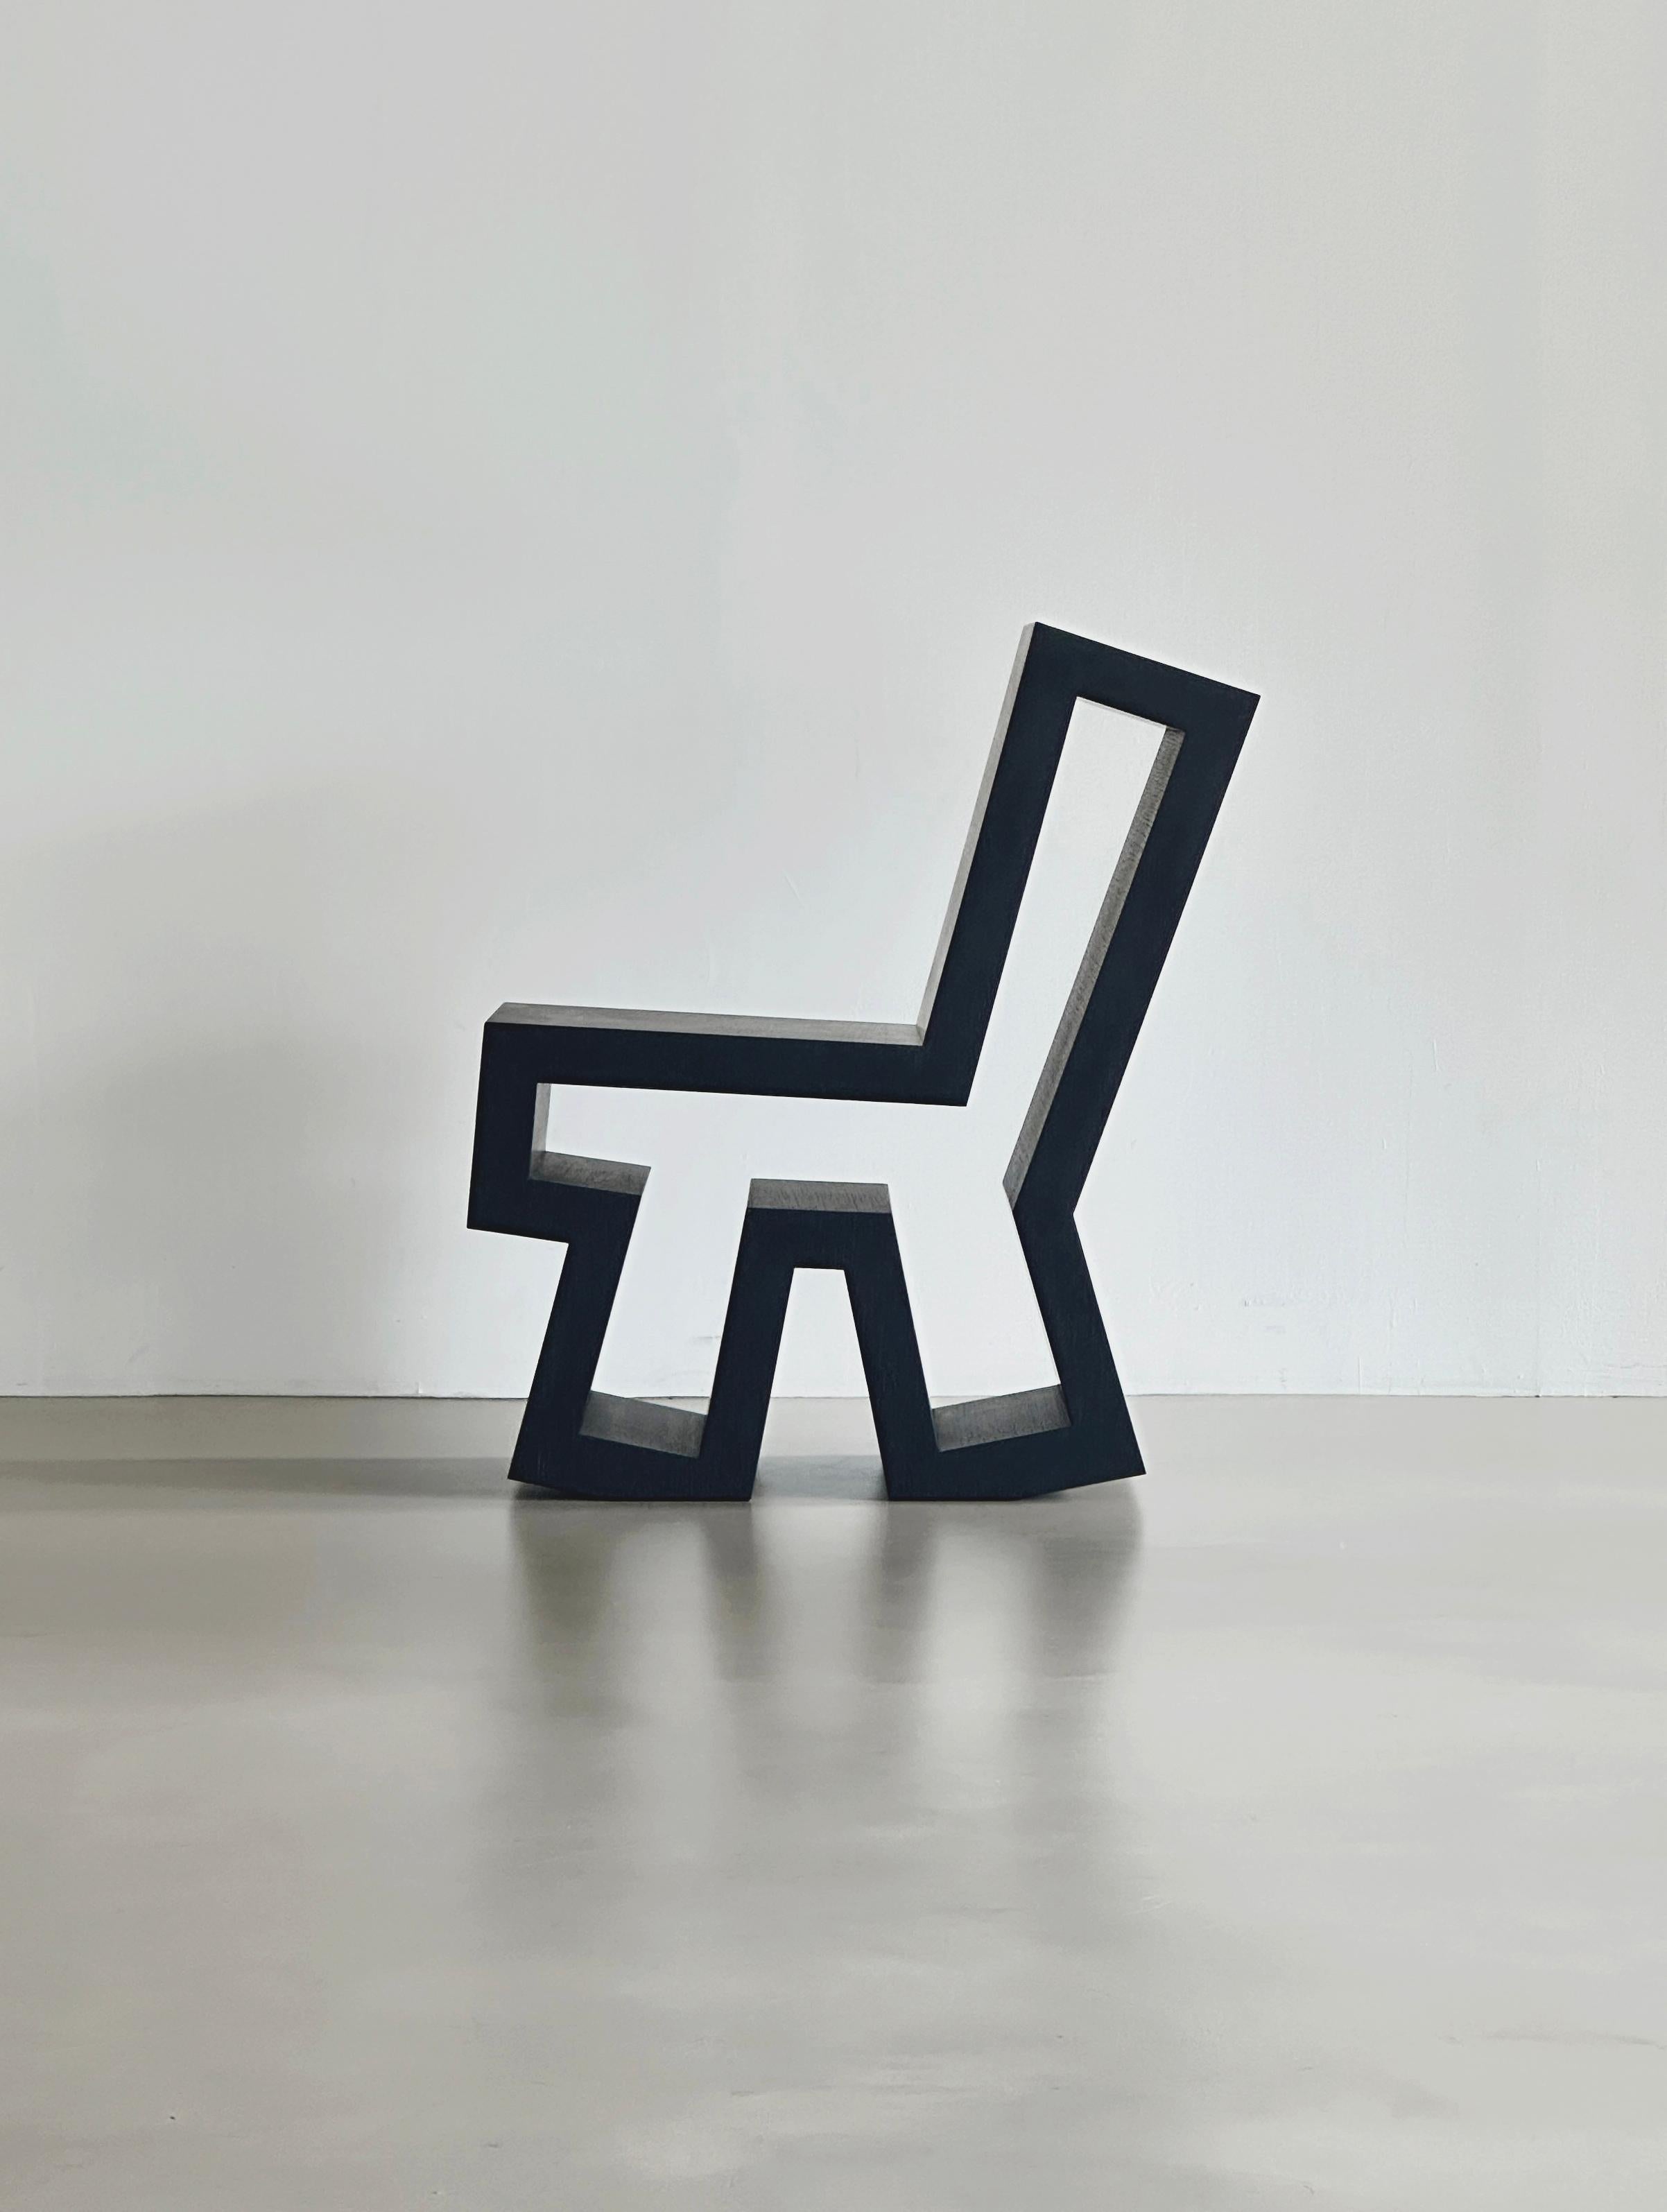 Graffiti Project Chair by Wonwoo Koo
Dimensions: D 75.4 x W 37 x H 83.9 cm.
Materials: Oak wood veneer.

Different color options are available: black, beige, white gray, blue or orange. Please contact us.

Wonwoo Koo
I majored in furniture design in